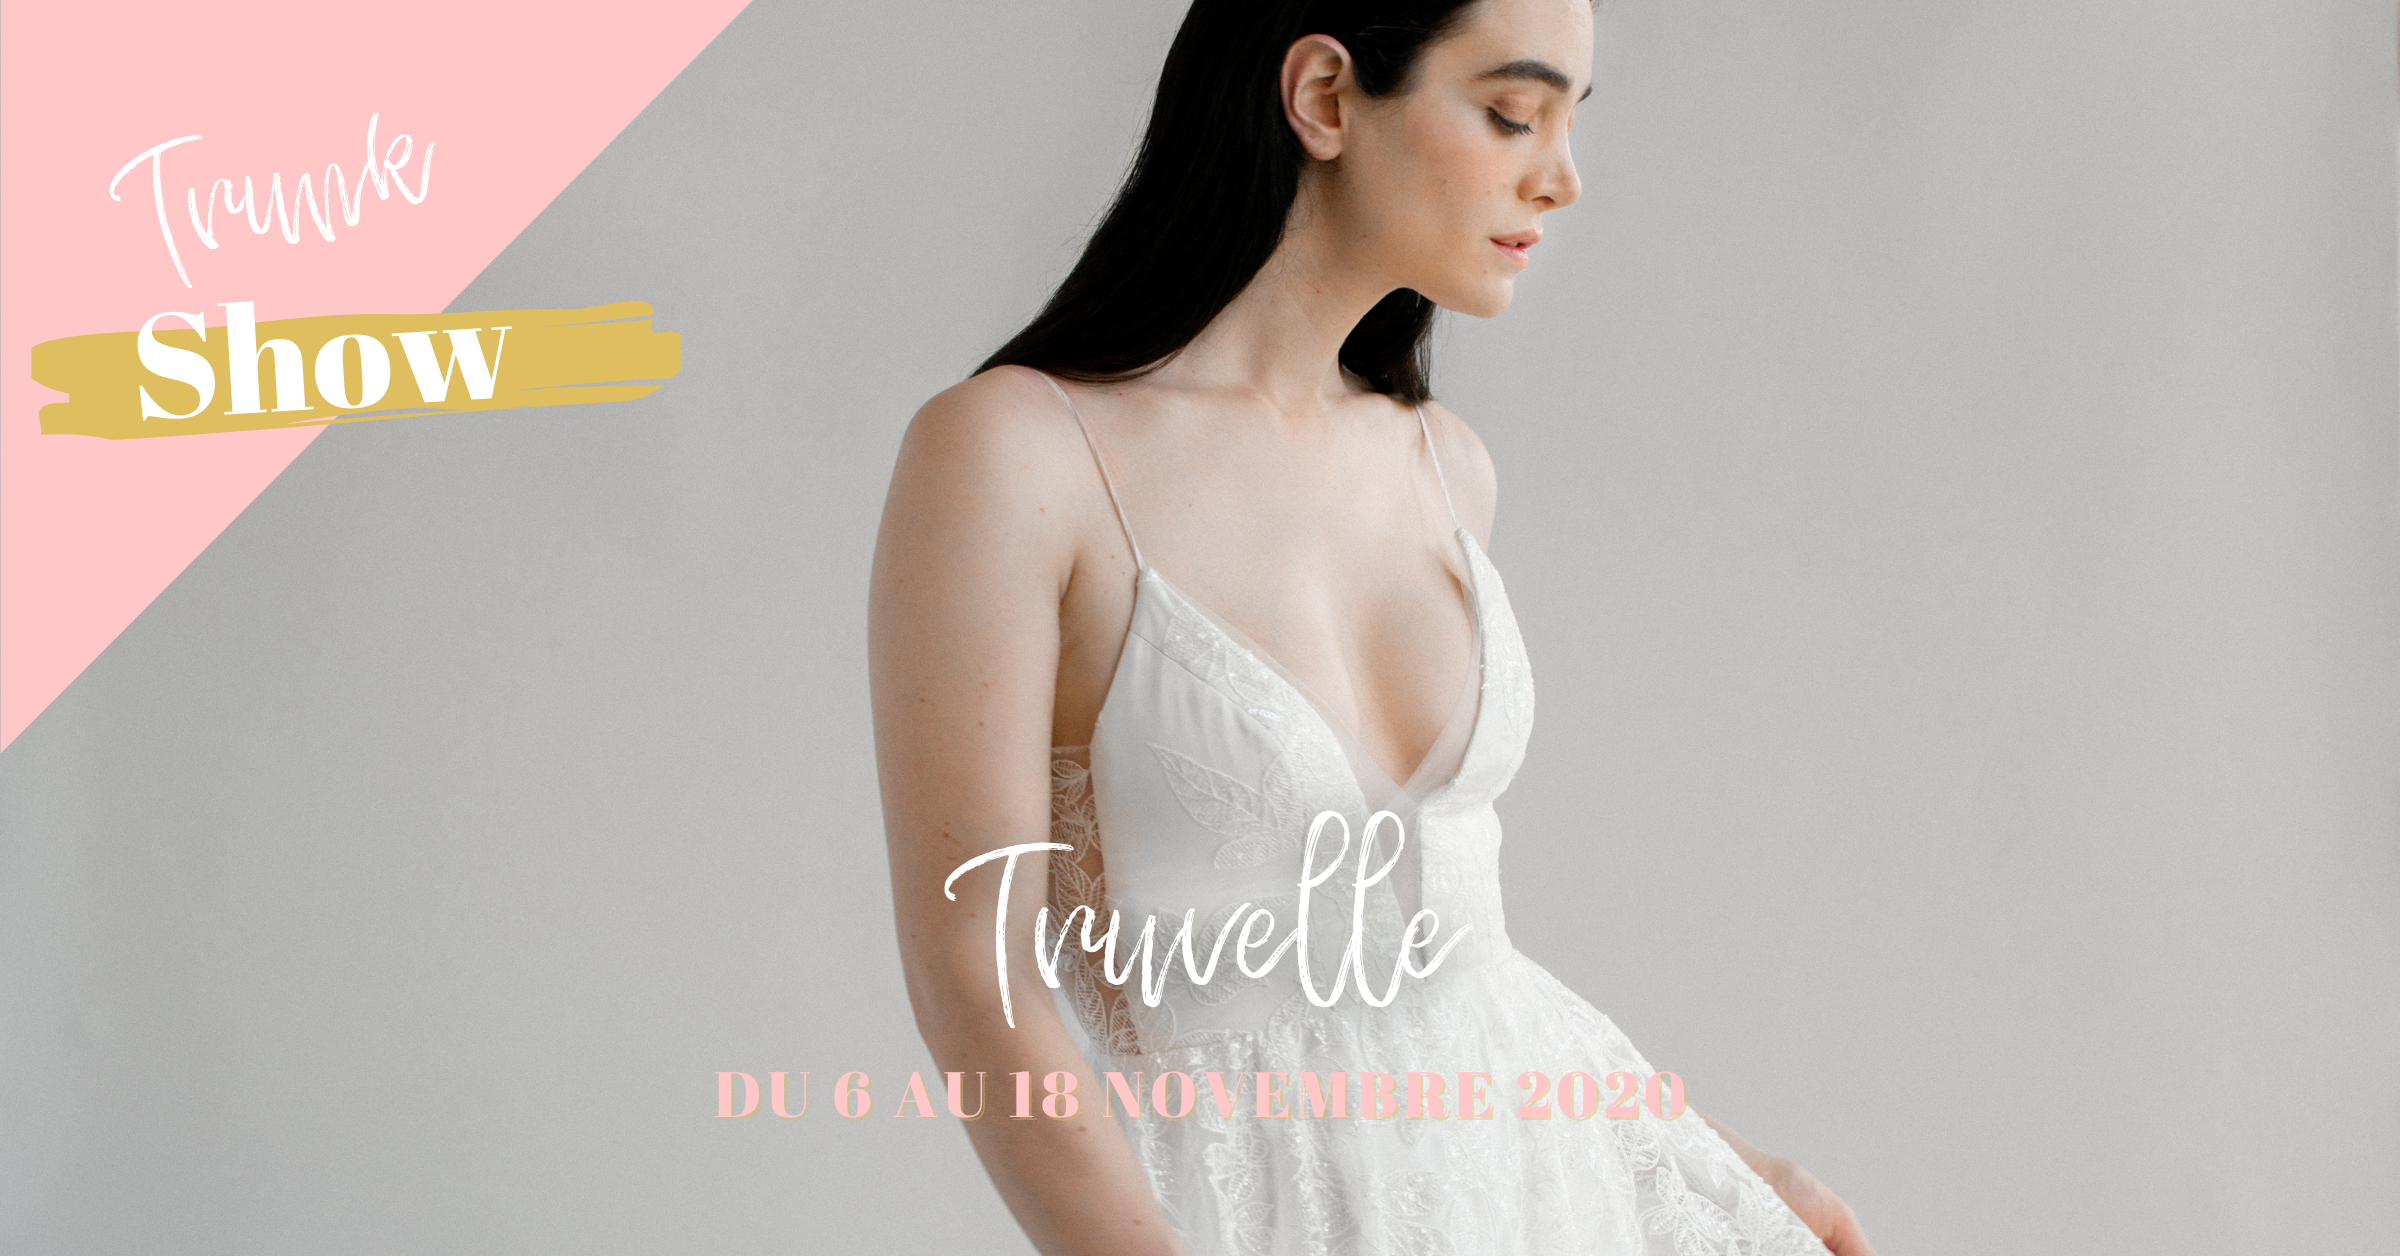 Truvelle from 6th to 8th November 2020